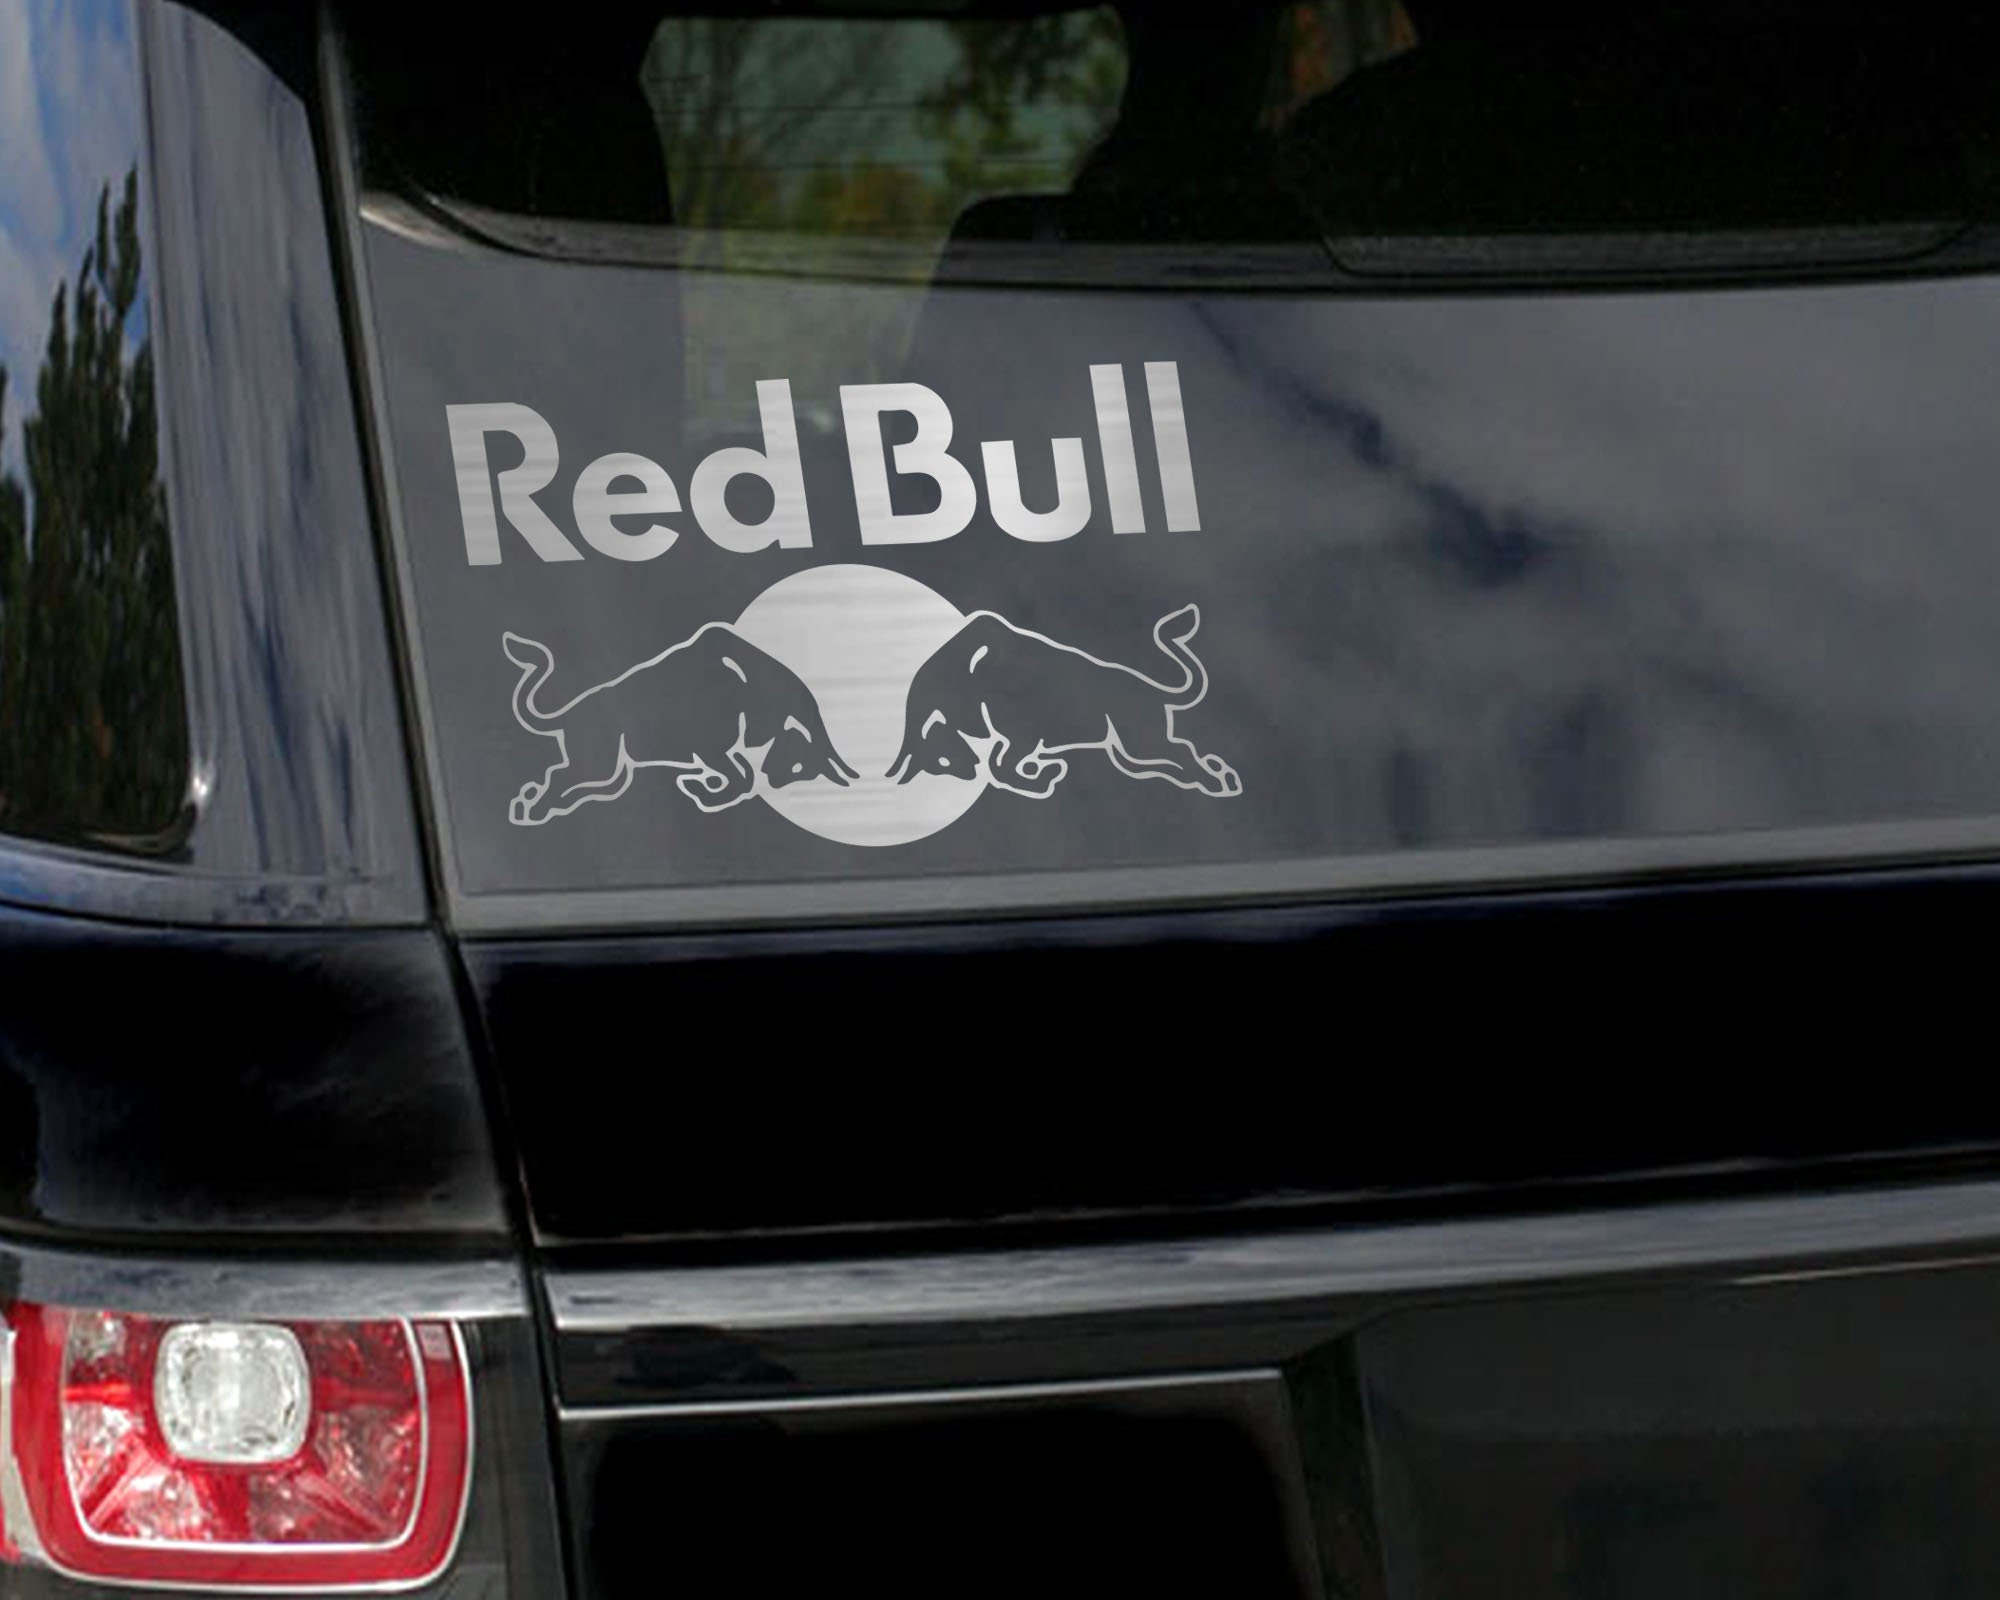  Decal Aggressive Red Bull Color Print (8 X 7.6 Inch) Aaa2a  Size: 5 X 4.7 Inches Vinyl color print : Sports & Outdoors